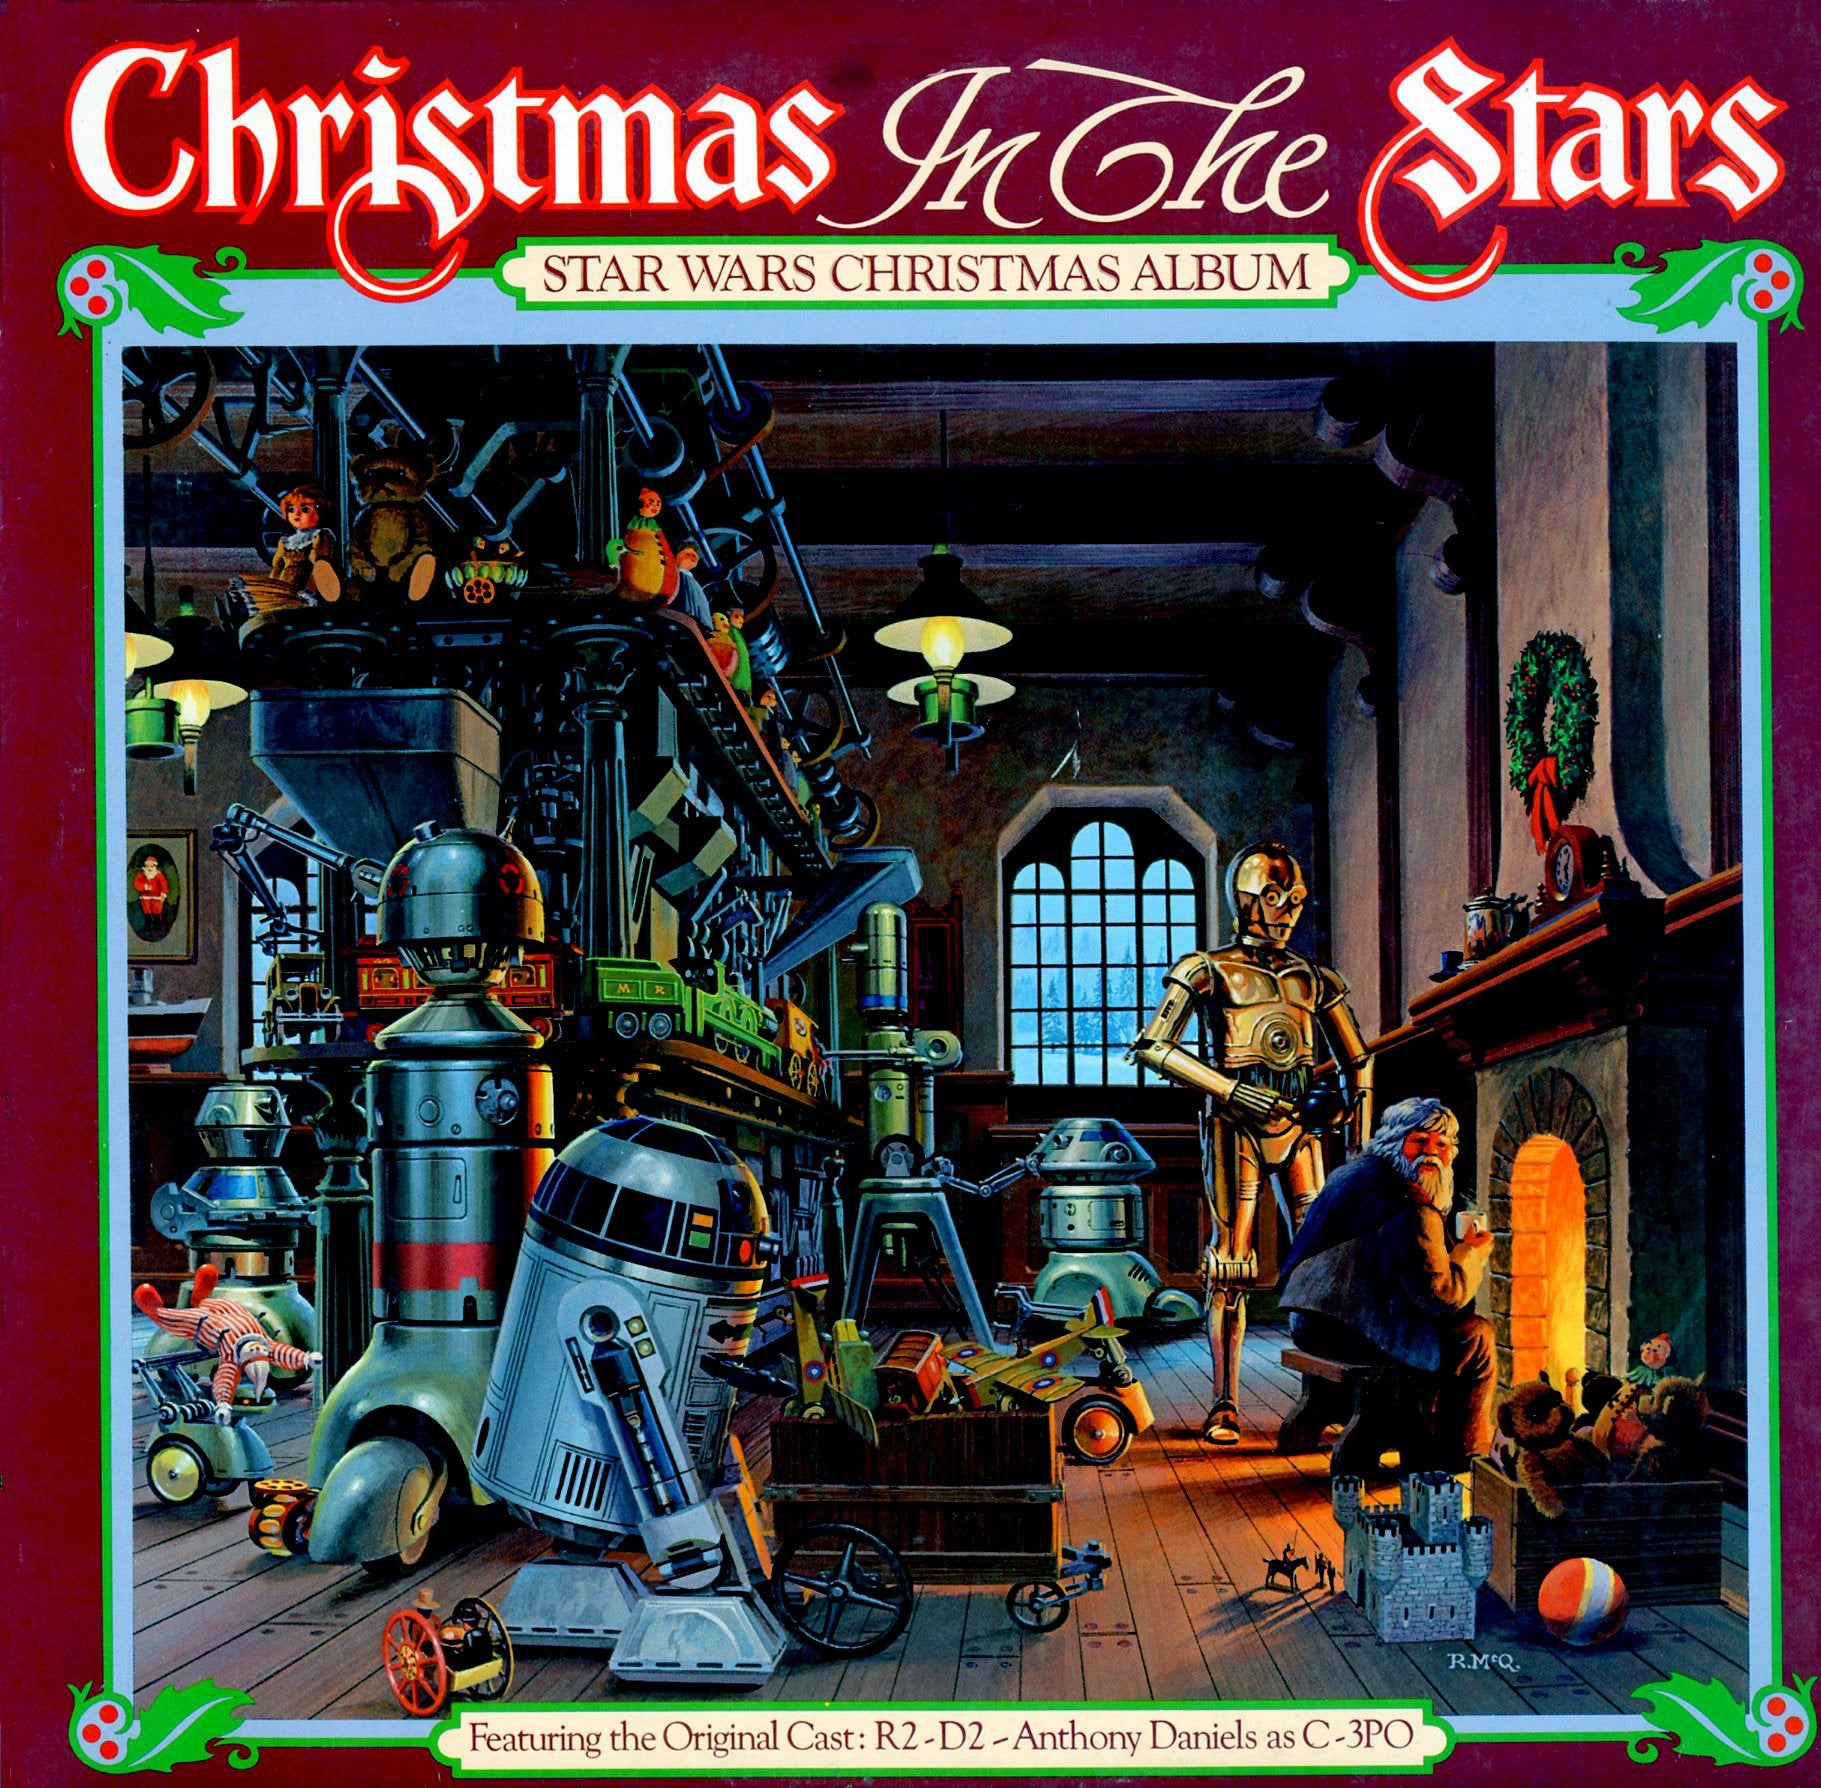 The 1980 festive masterpiece ‘Christmas in the Stars: Star Wars Christmas Album’